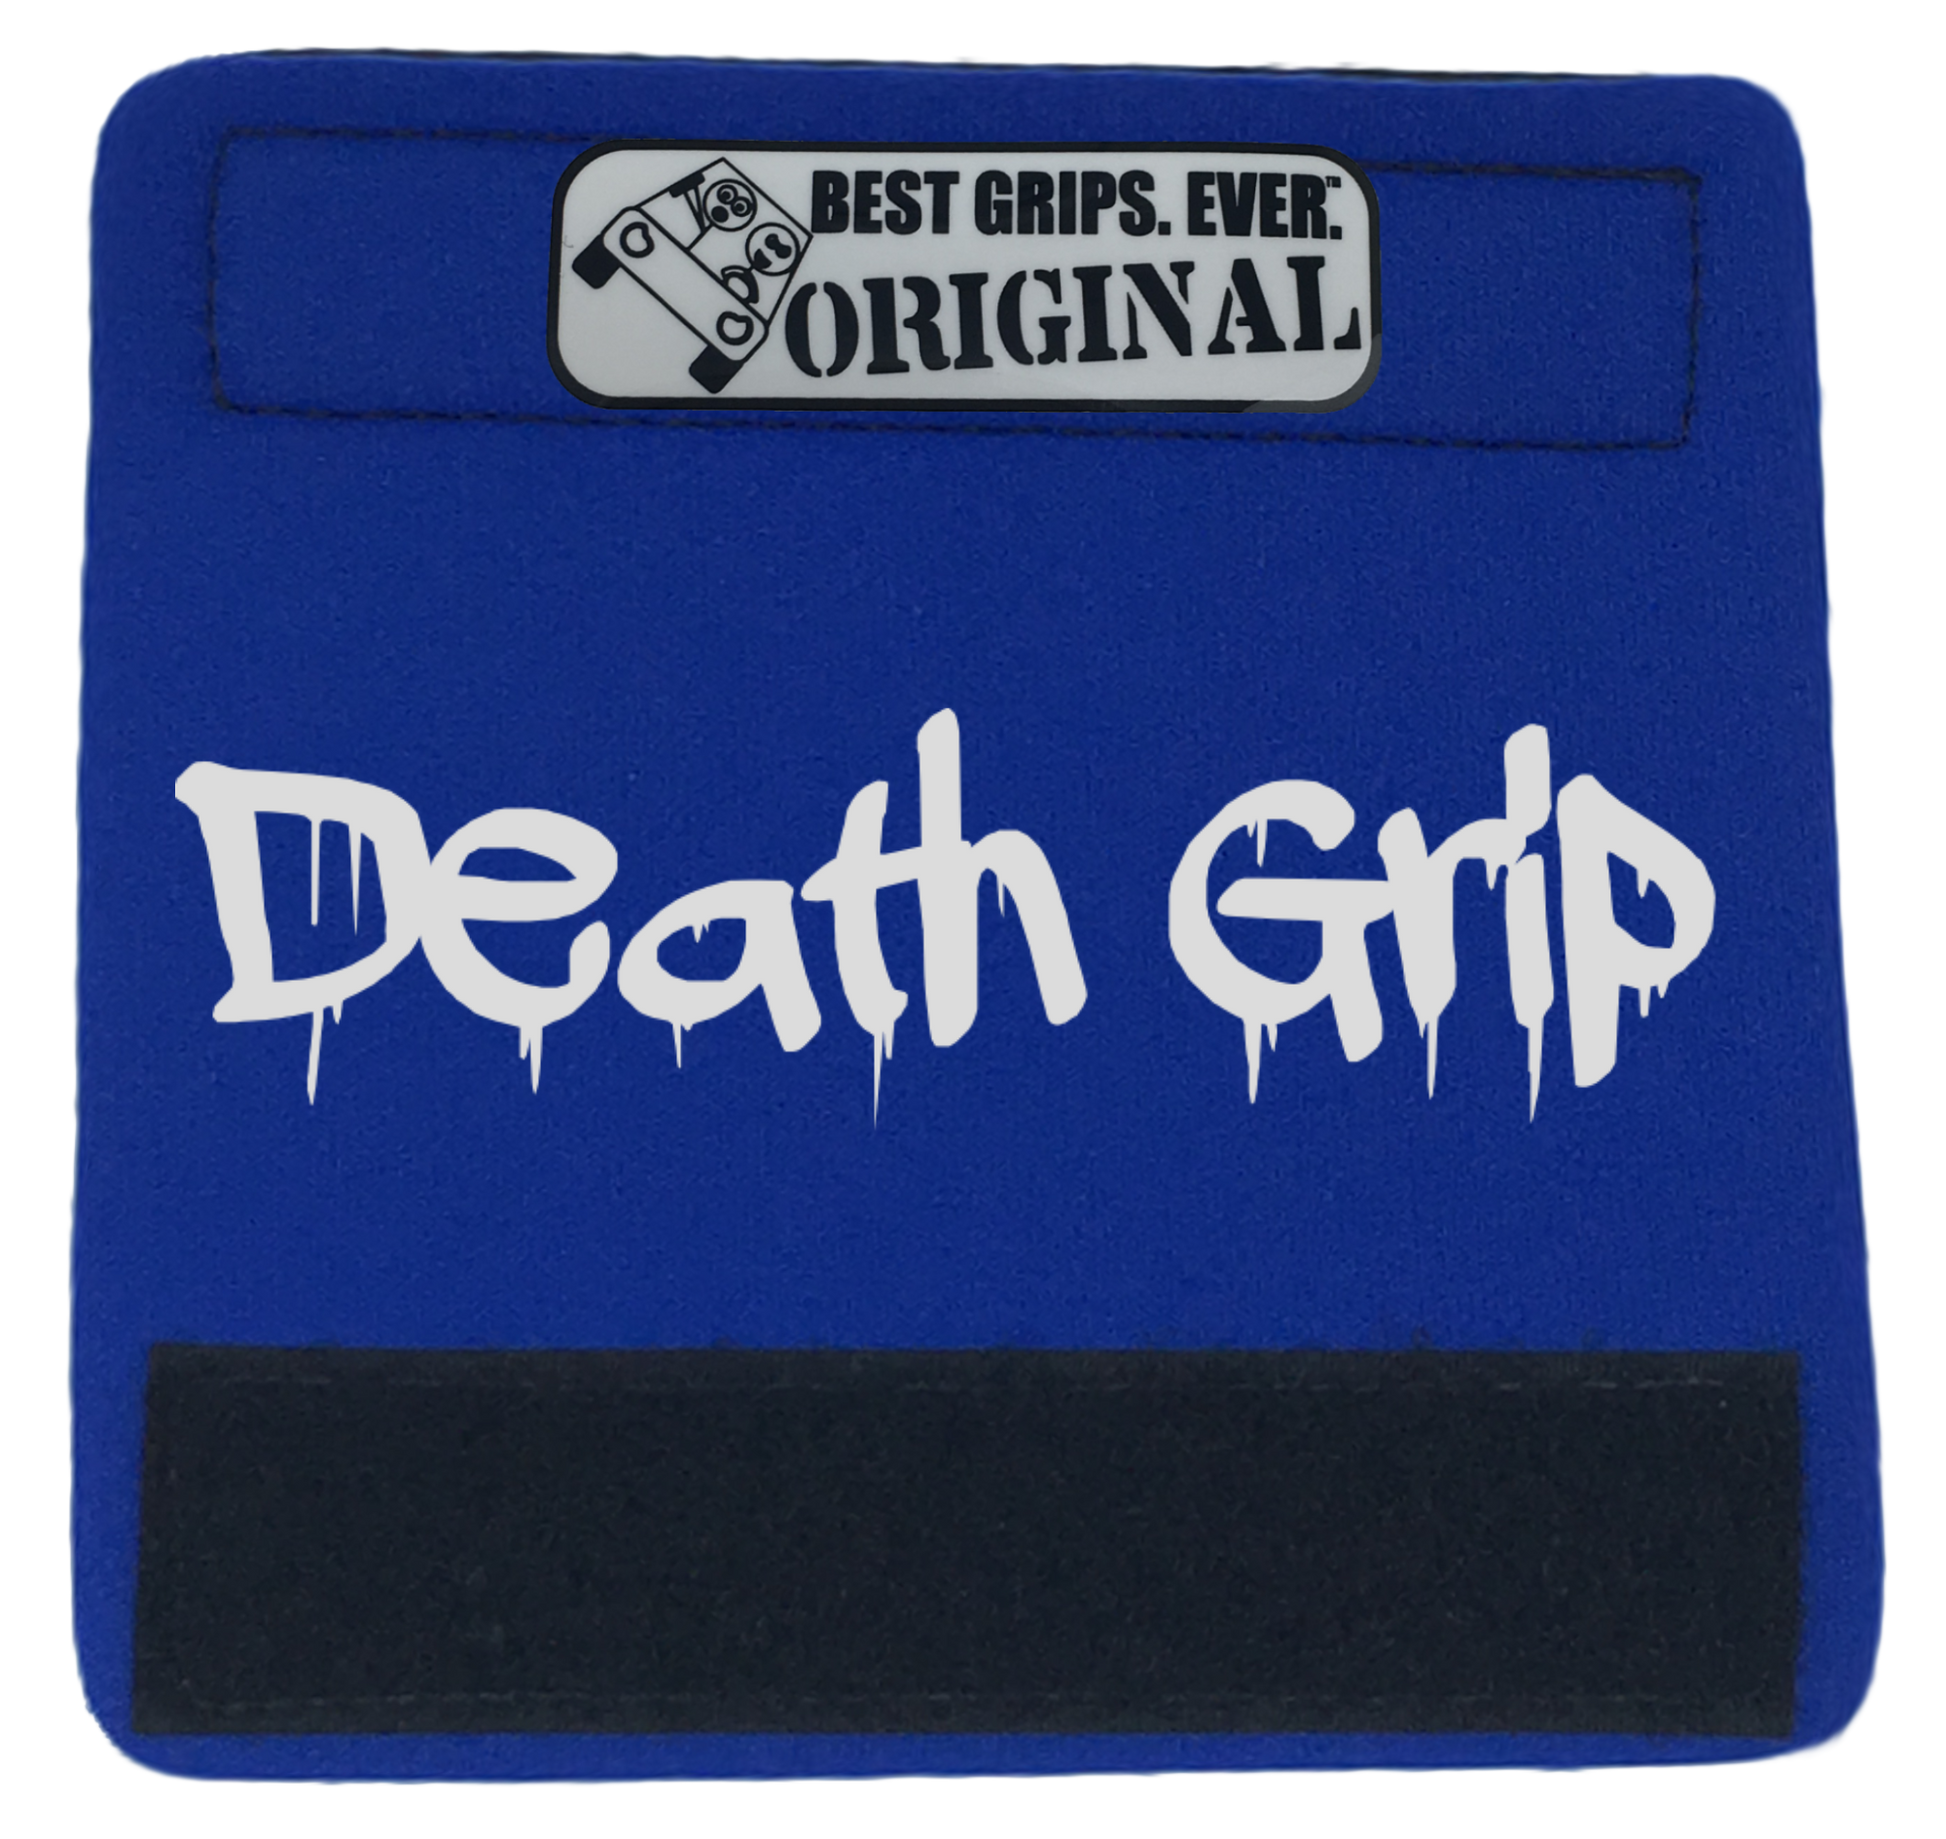 The Death Grip. - BEST GRIPS. EVER.®